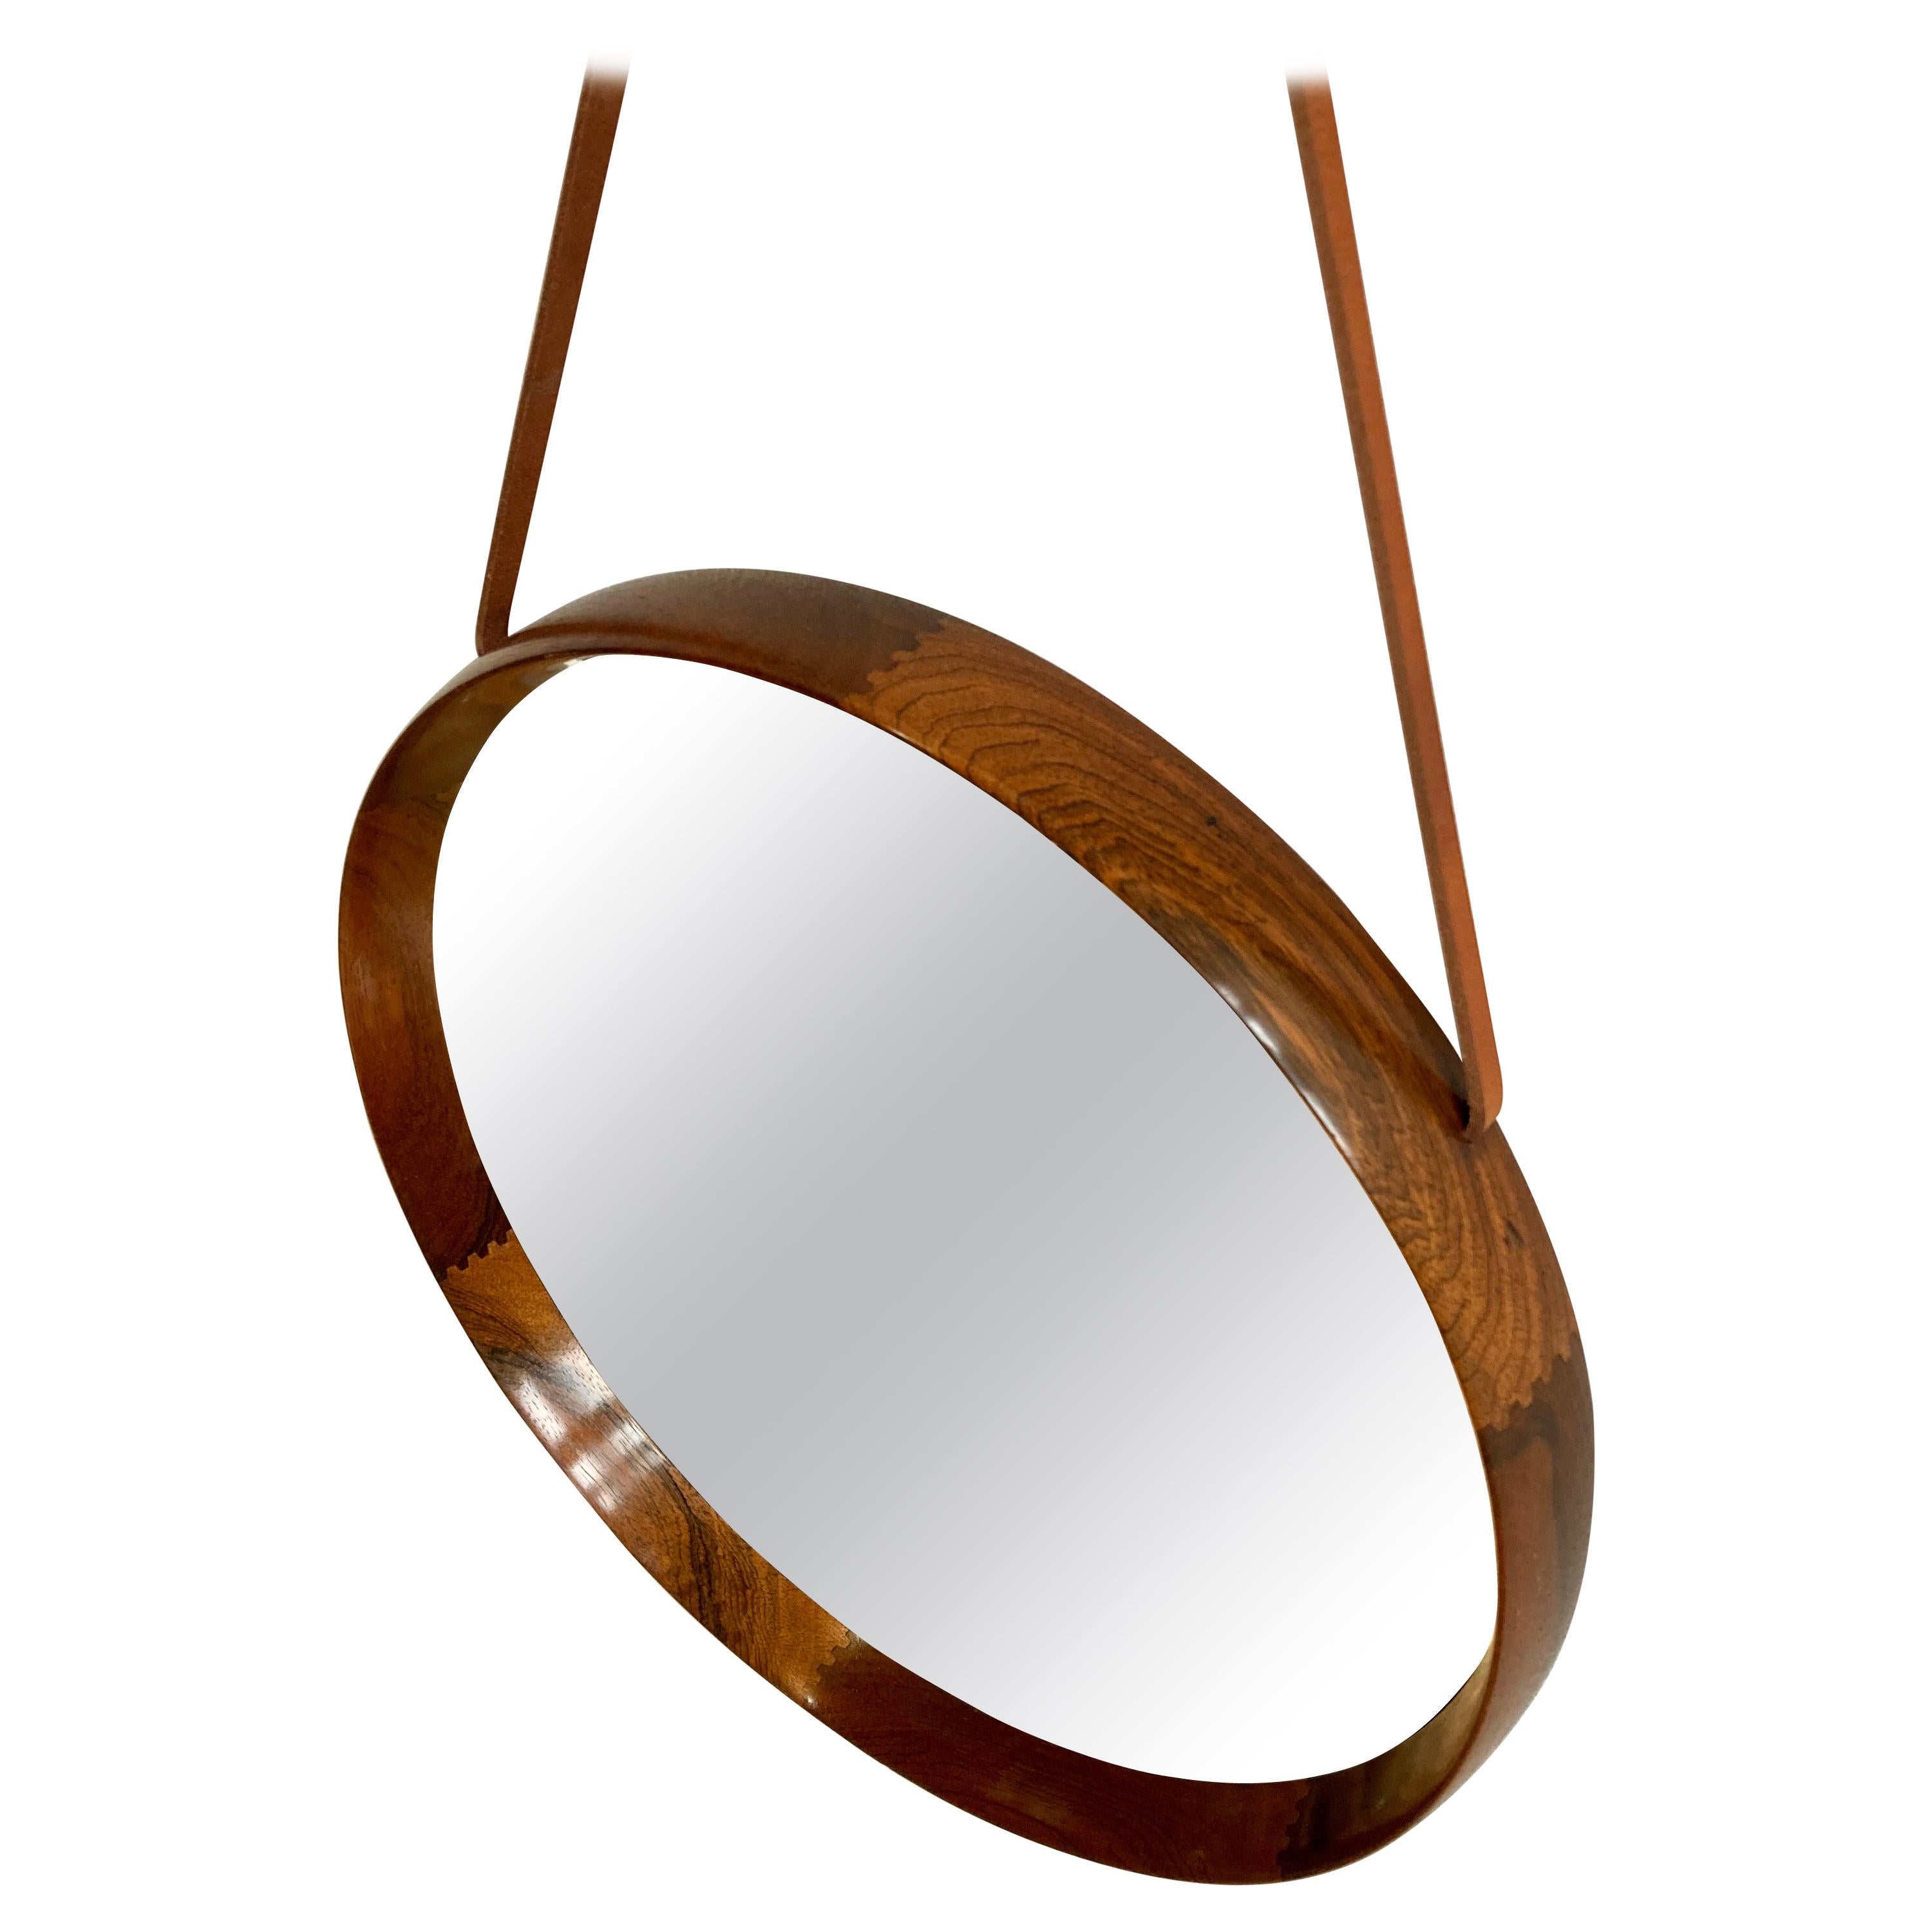 Extremely pretty and very hard to find wall mirror designed by Uno & Osten Kristiansson for Swedish firm Luxus.

Beautifully recessed solid Brazilian rosewood frame with pleasing visible joinery. The mirror hangs on an intergrated leather